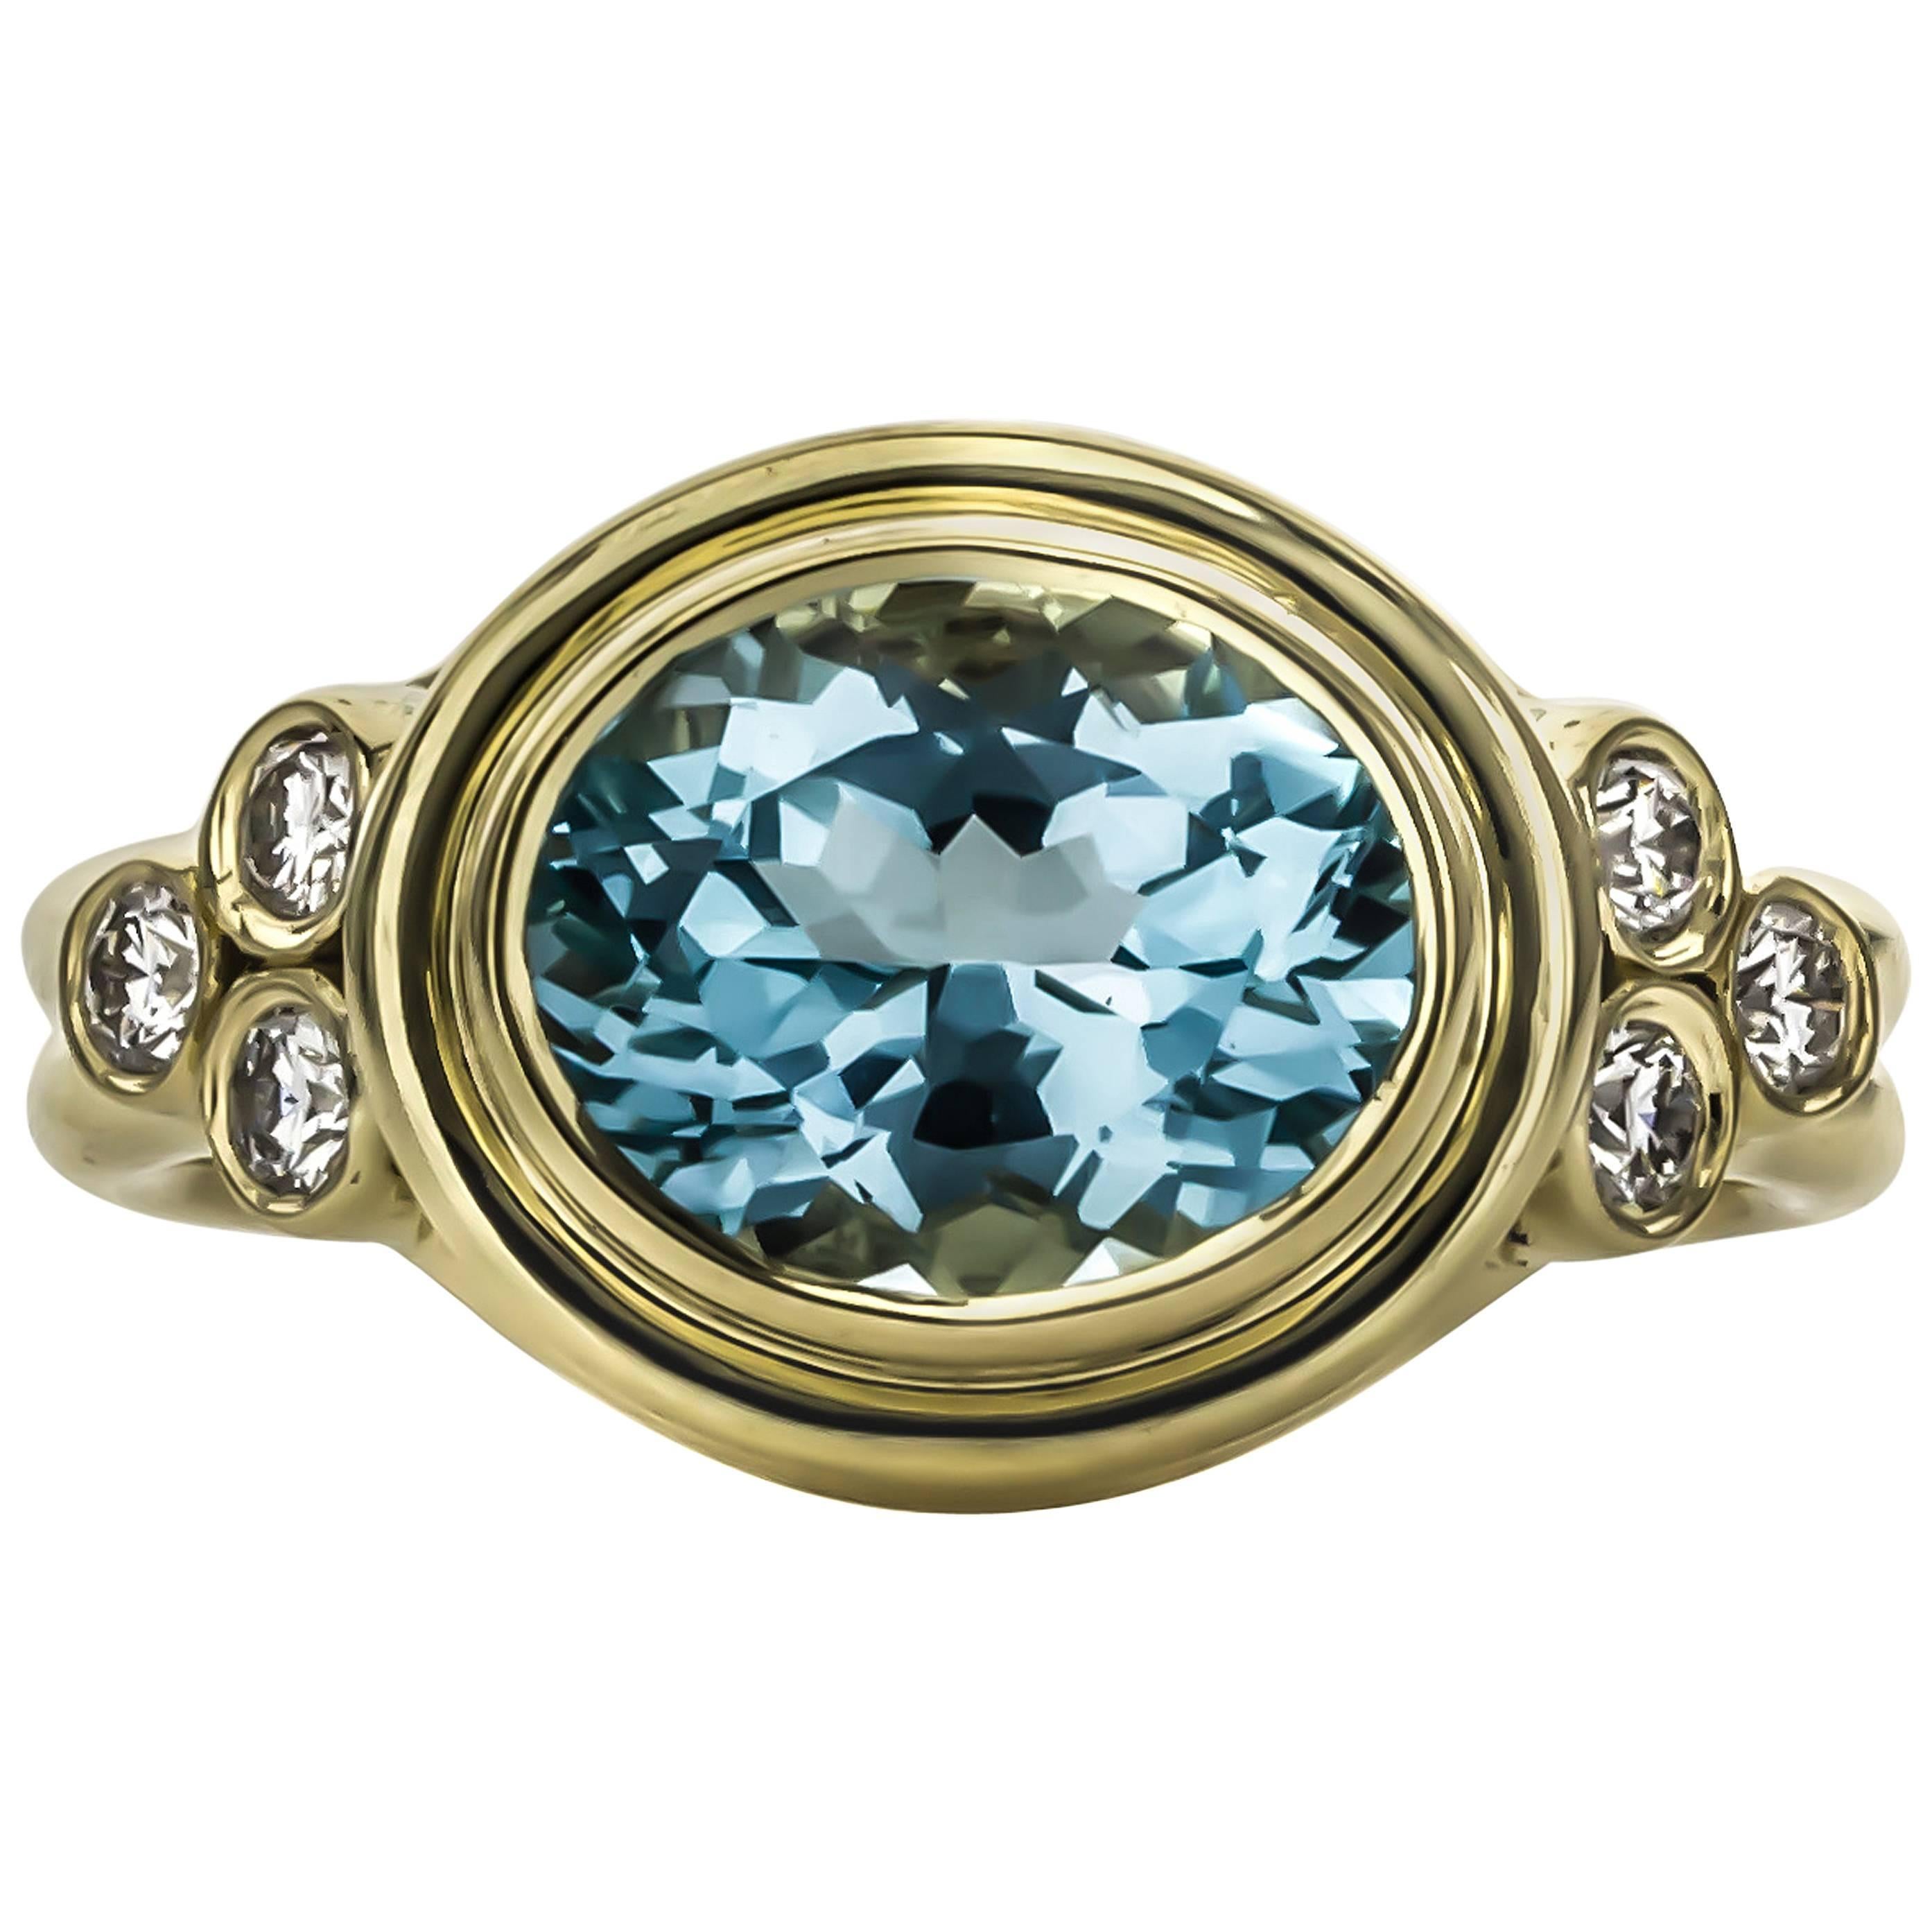 One of a Kind 3.02 Carat Aquamarine Diamond Gold Ring For Sale